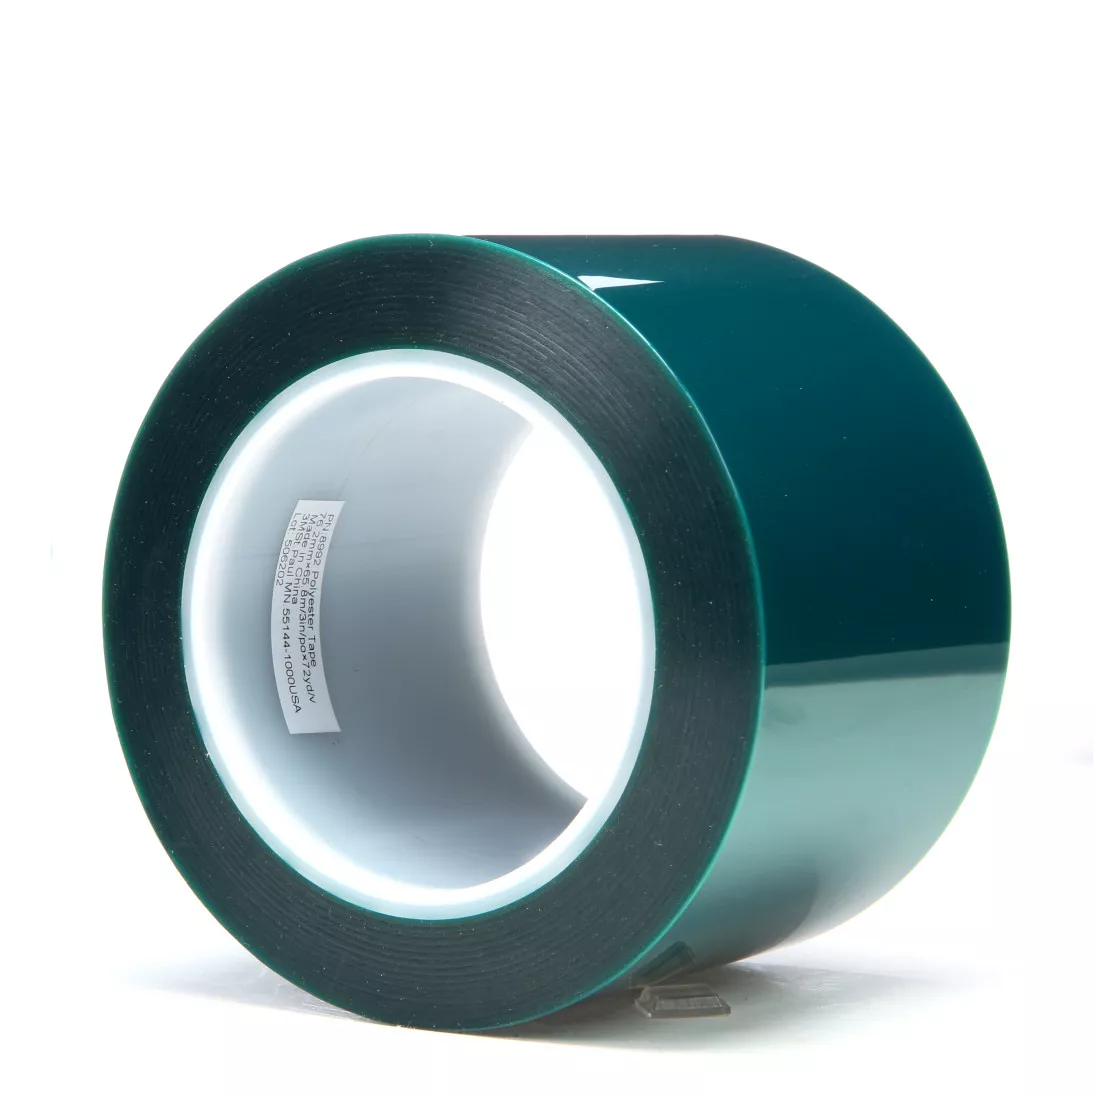 3M™ Polyester Tape 8992, Green, 3 in x 72 yd, 3.2 mil, 12 rolls per case